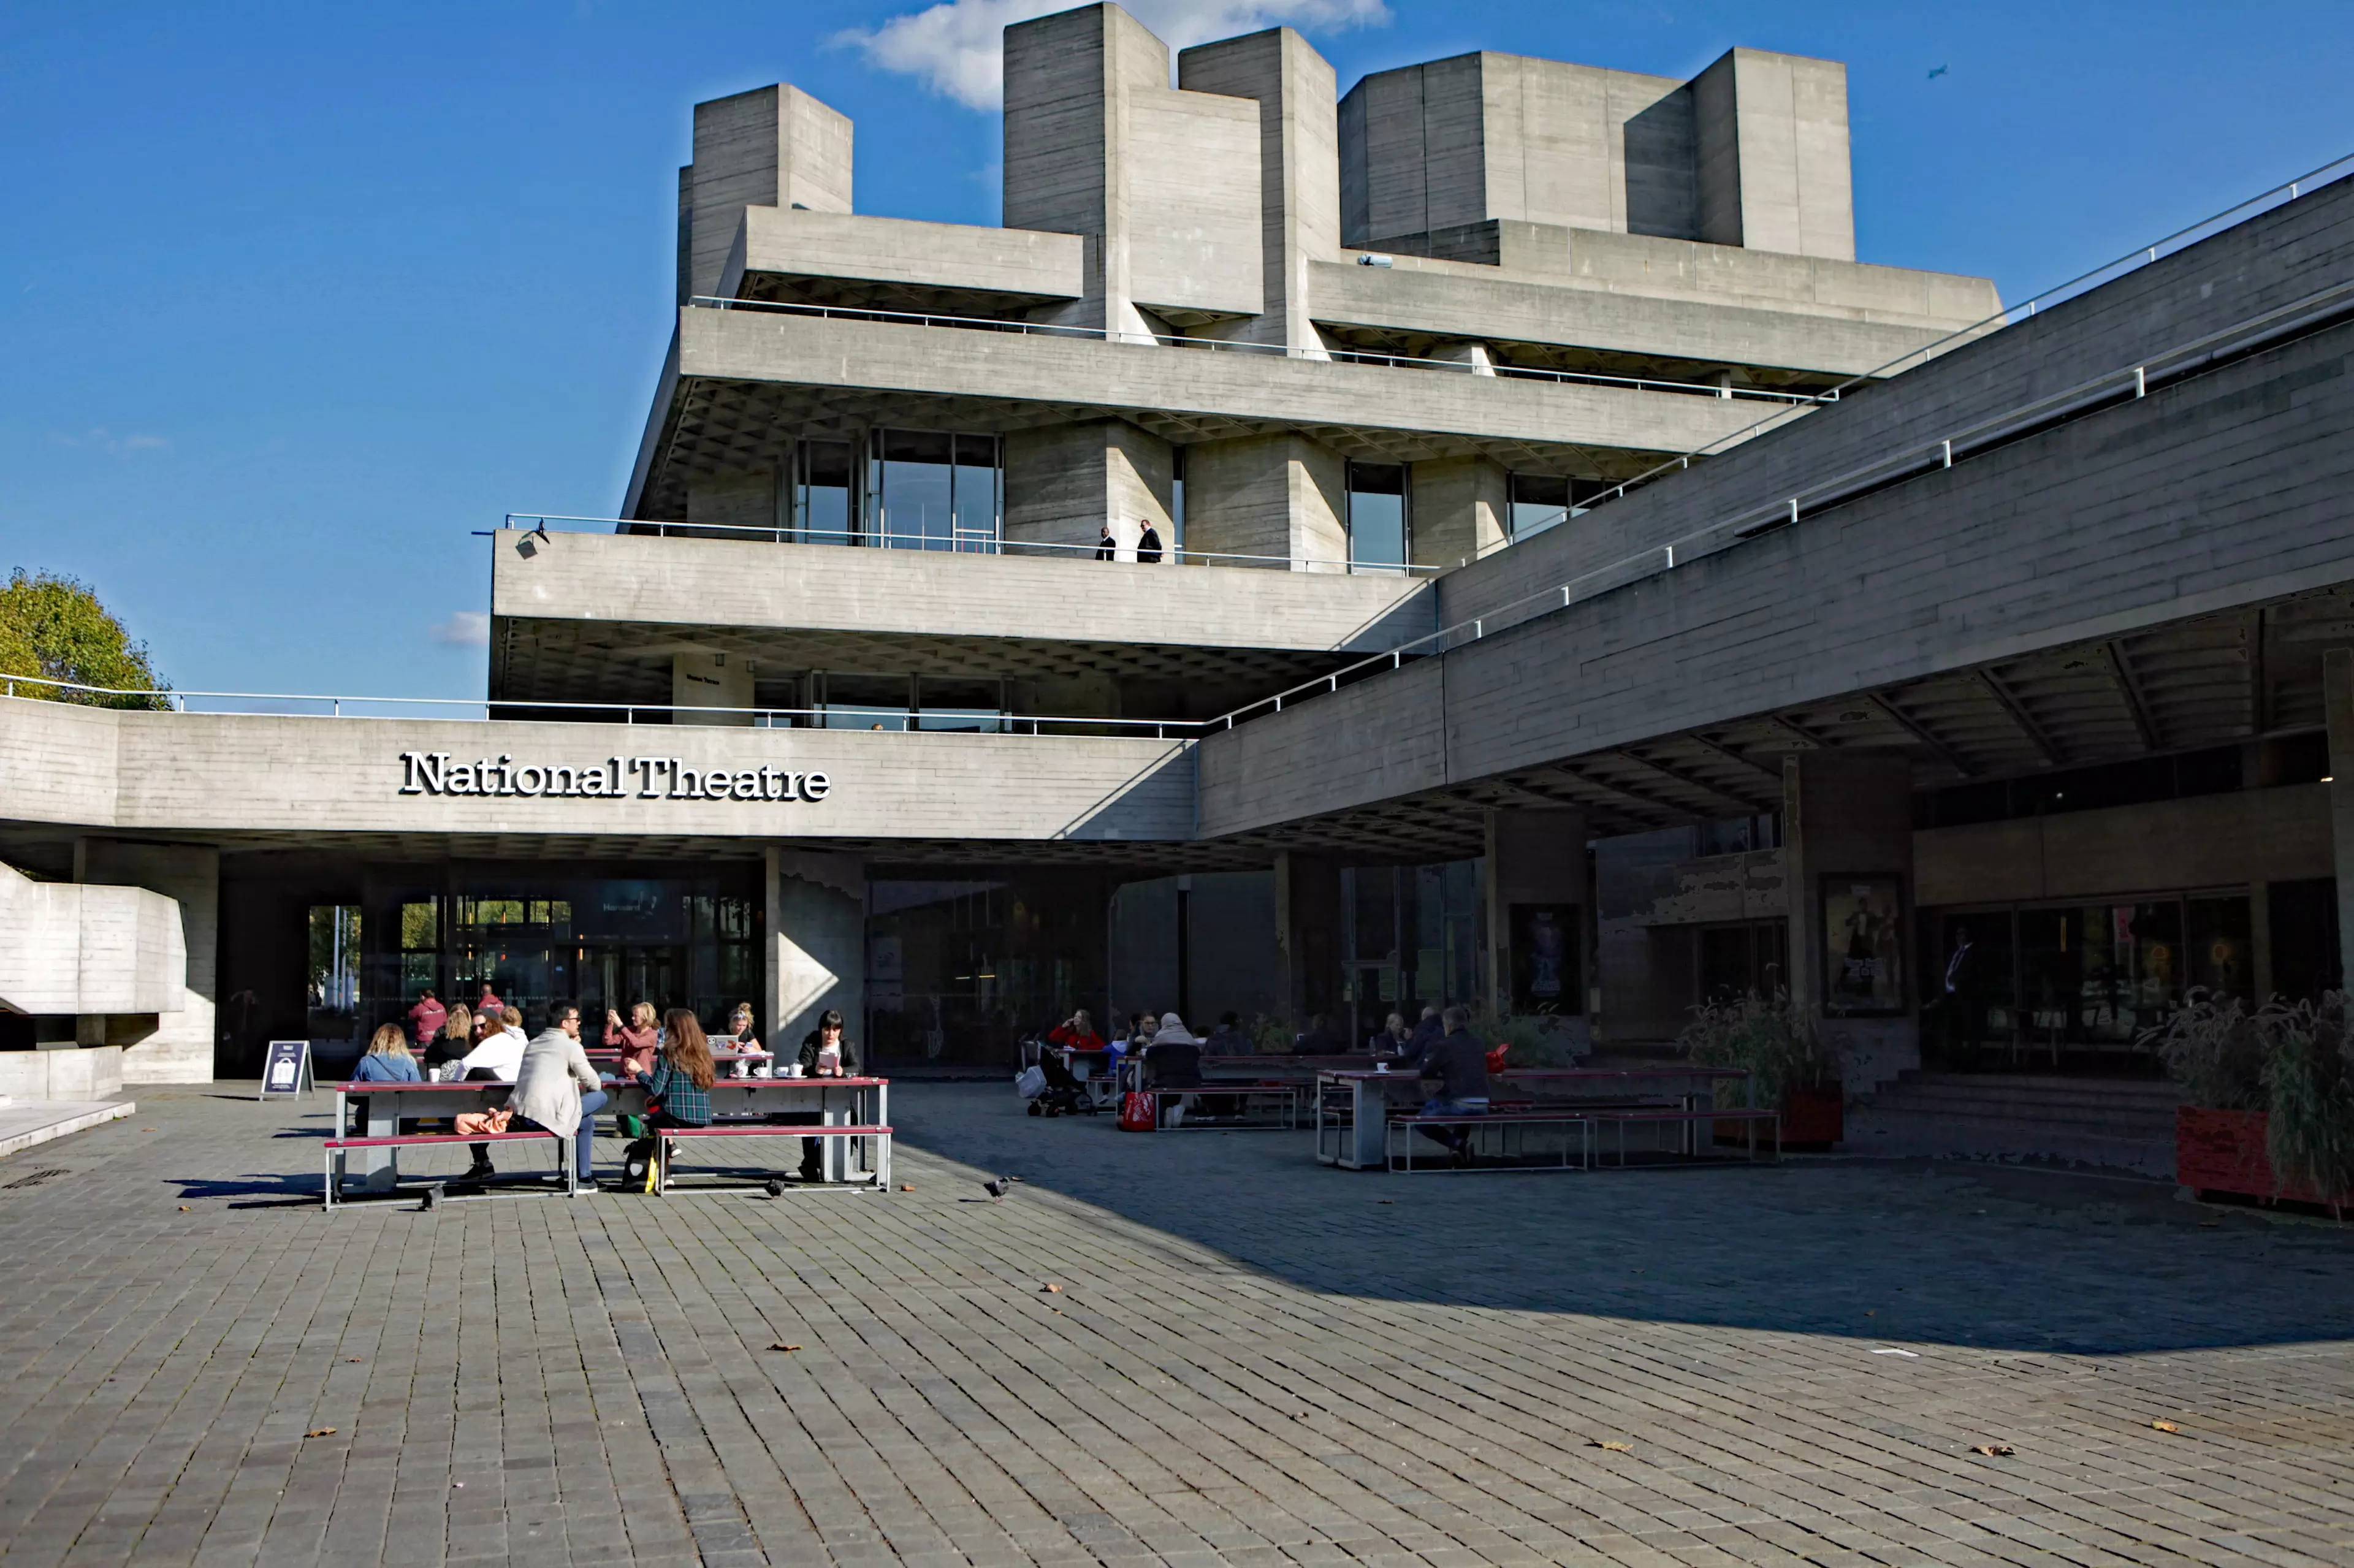 A number of theatres have said they will be introducing gender neutral language.